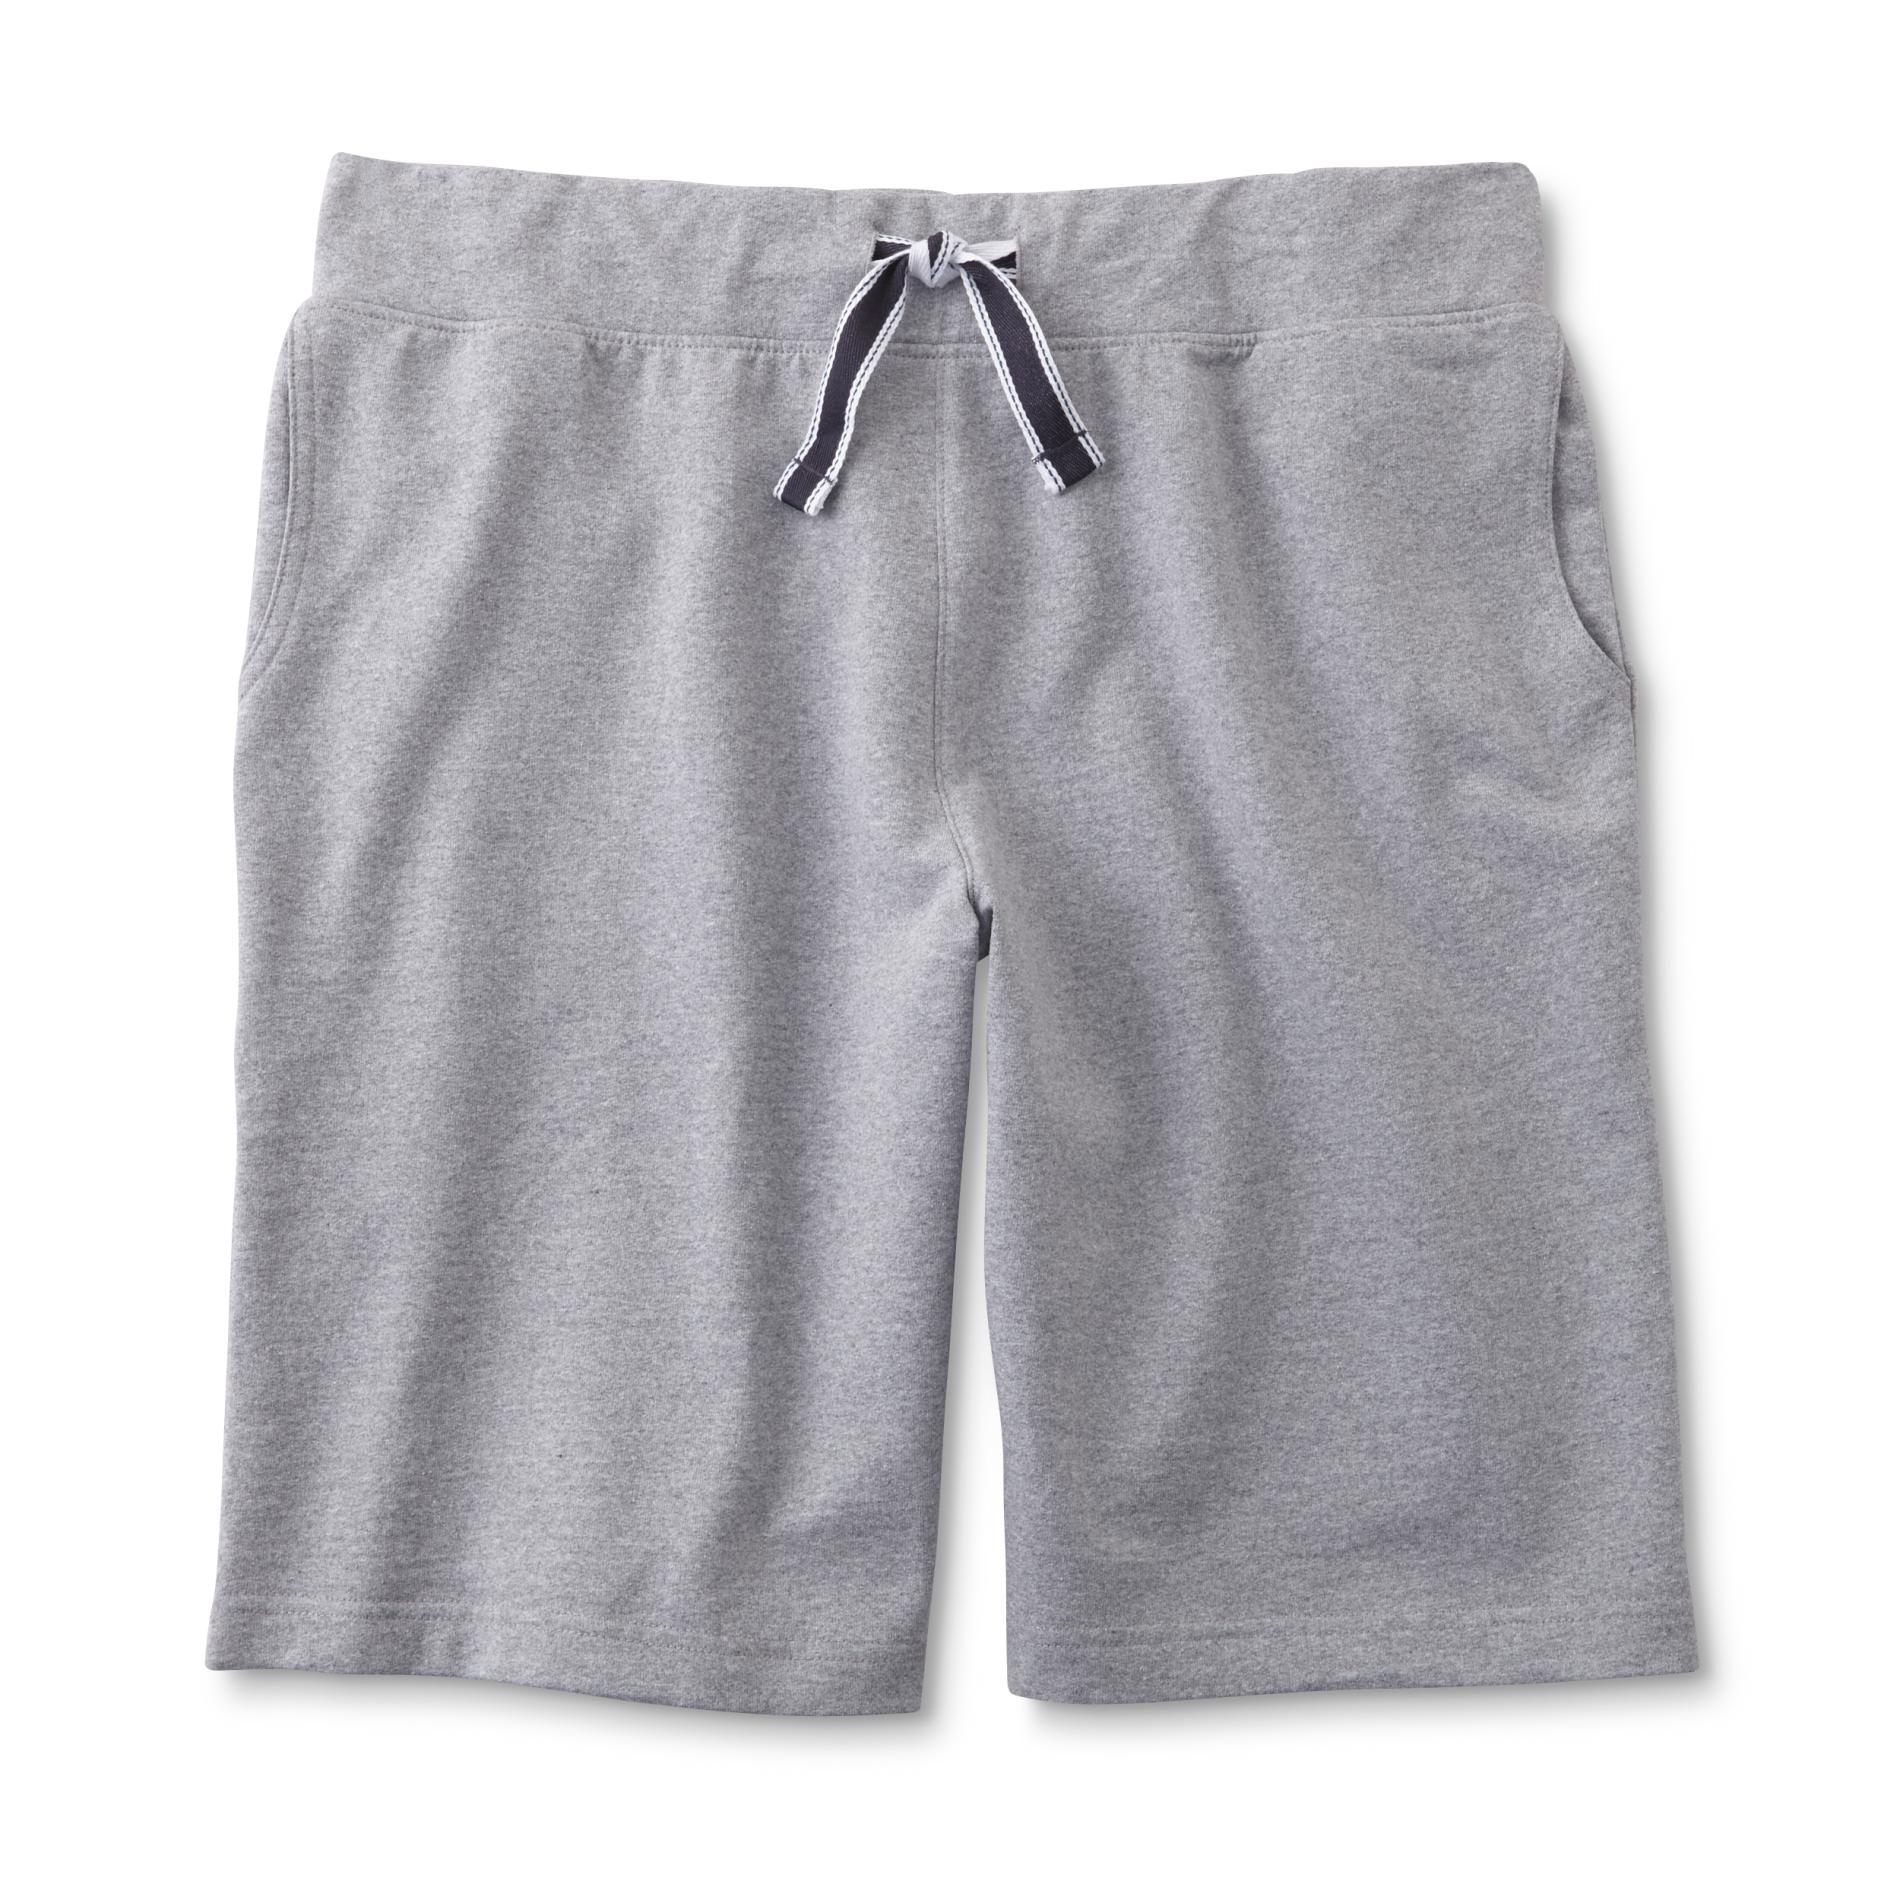 Basic Editions Men's French Terry Knit Shorts